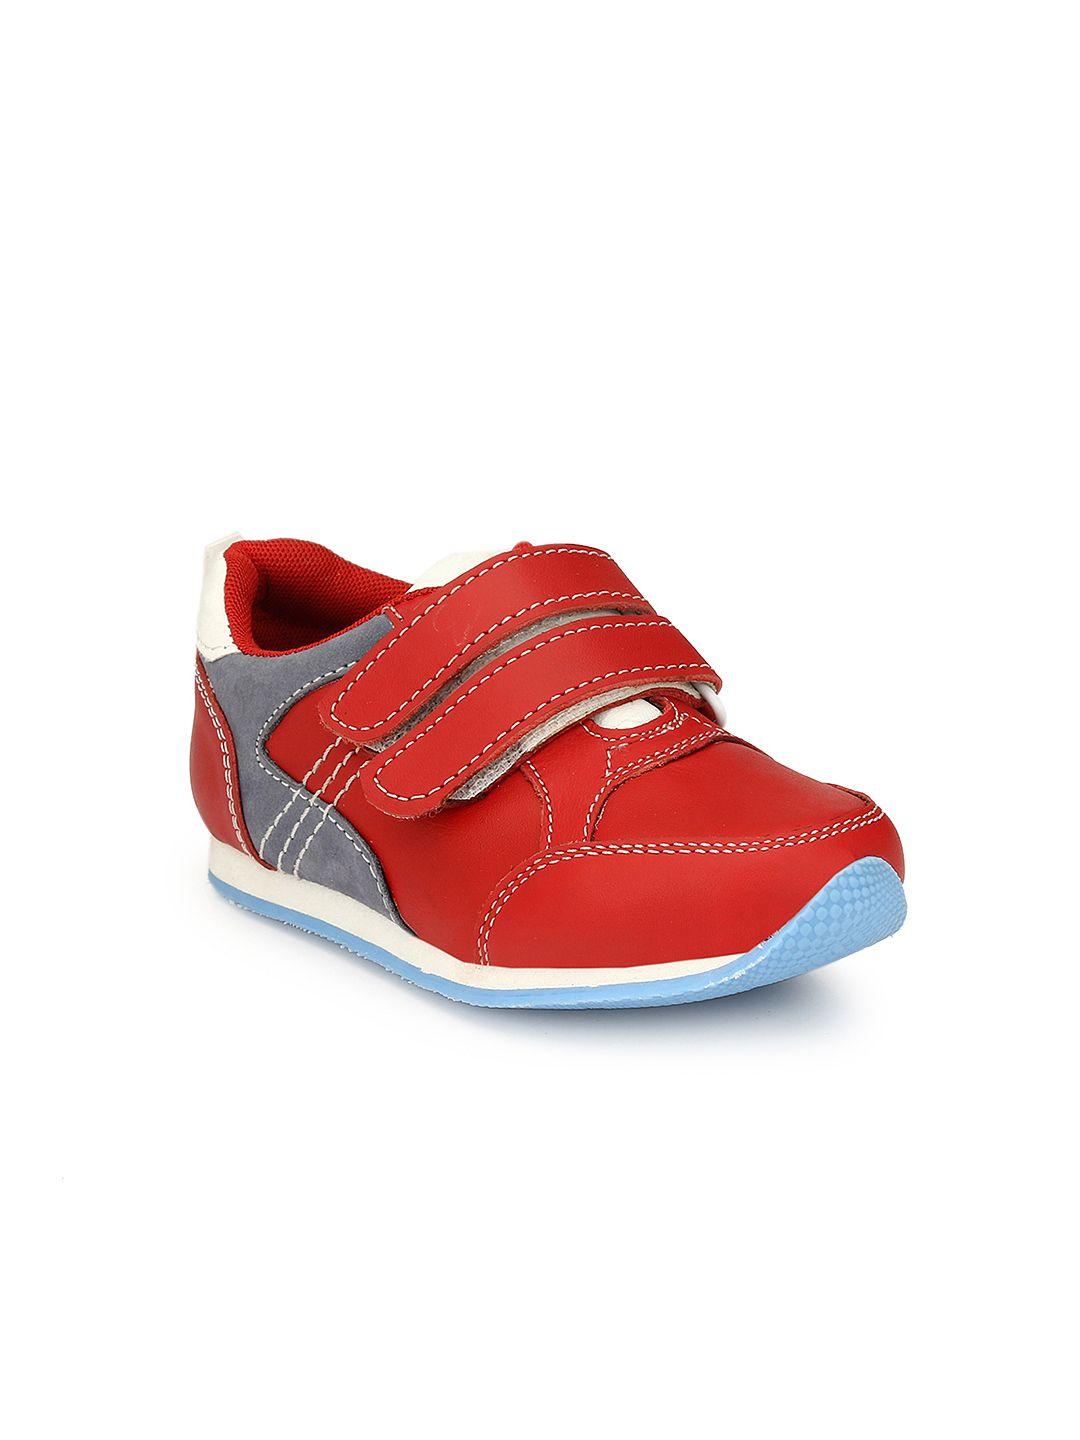 tuskey boys red sneakers